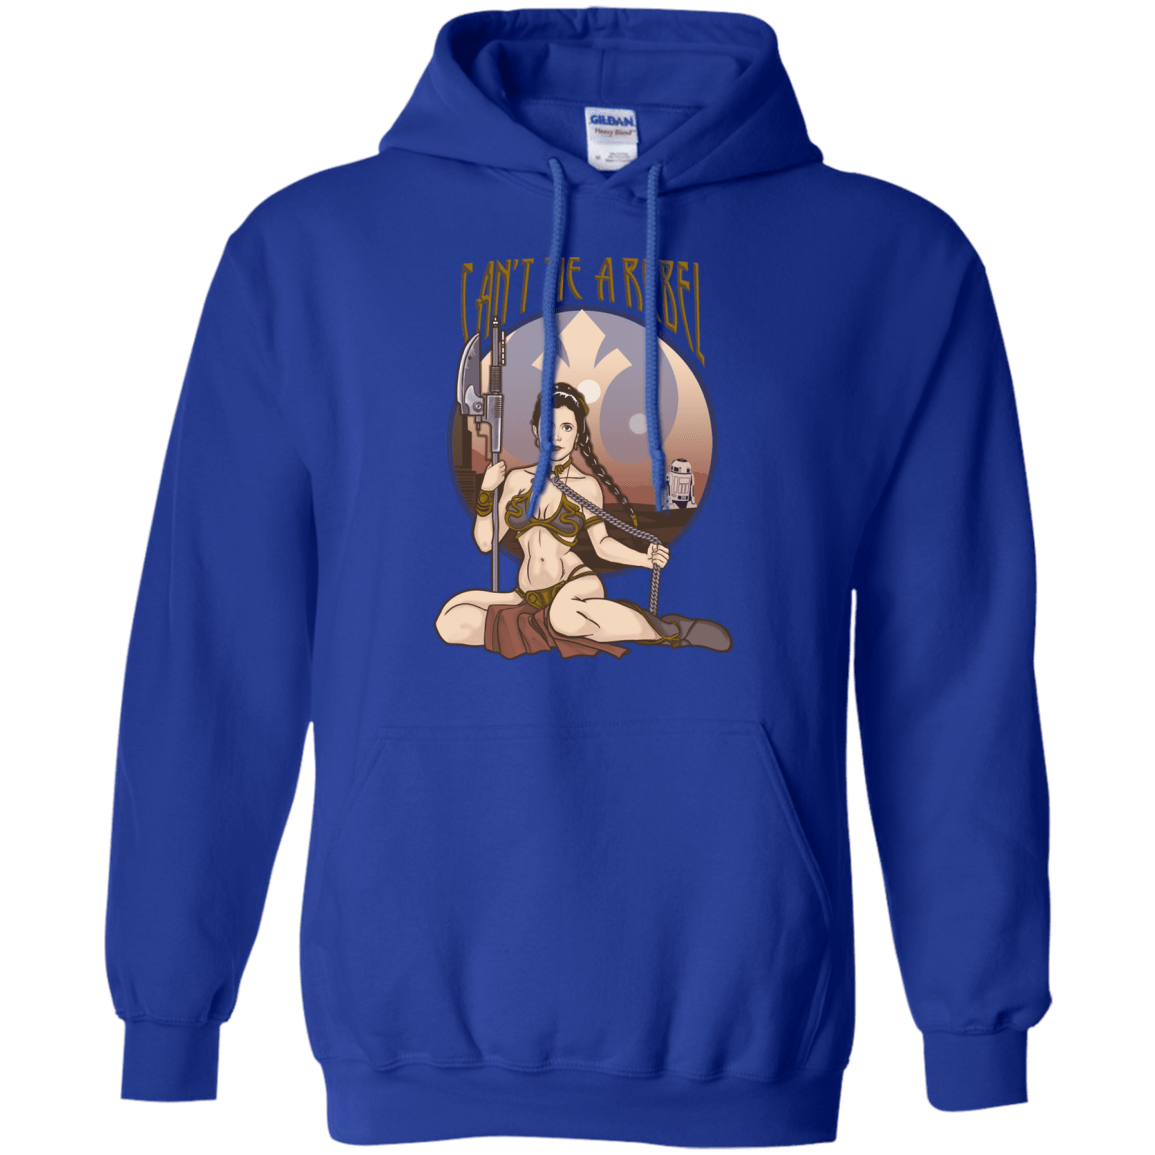 Sweatshirts Royal / Small Can't Tie a Rebel Pullover Hoodie